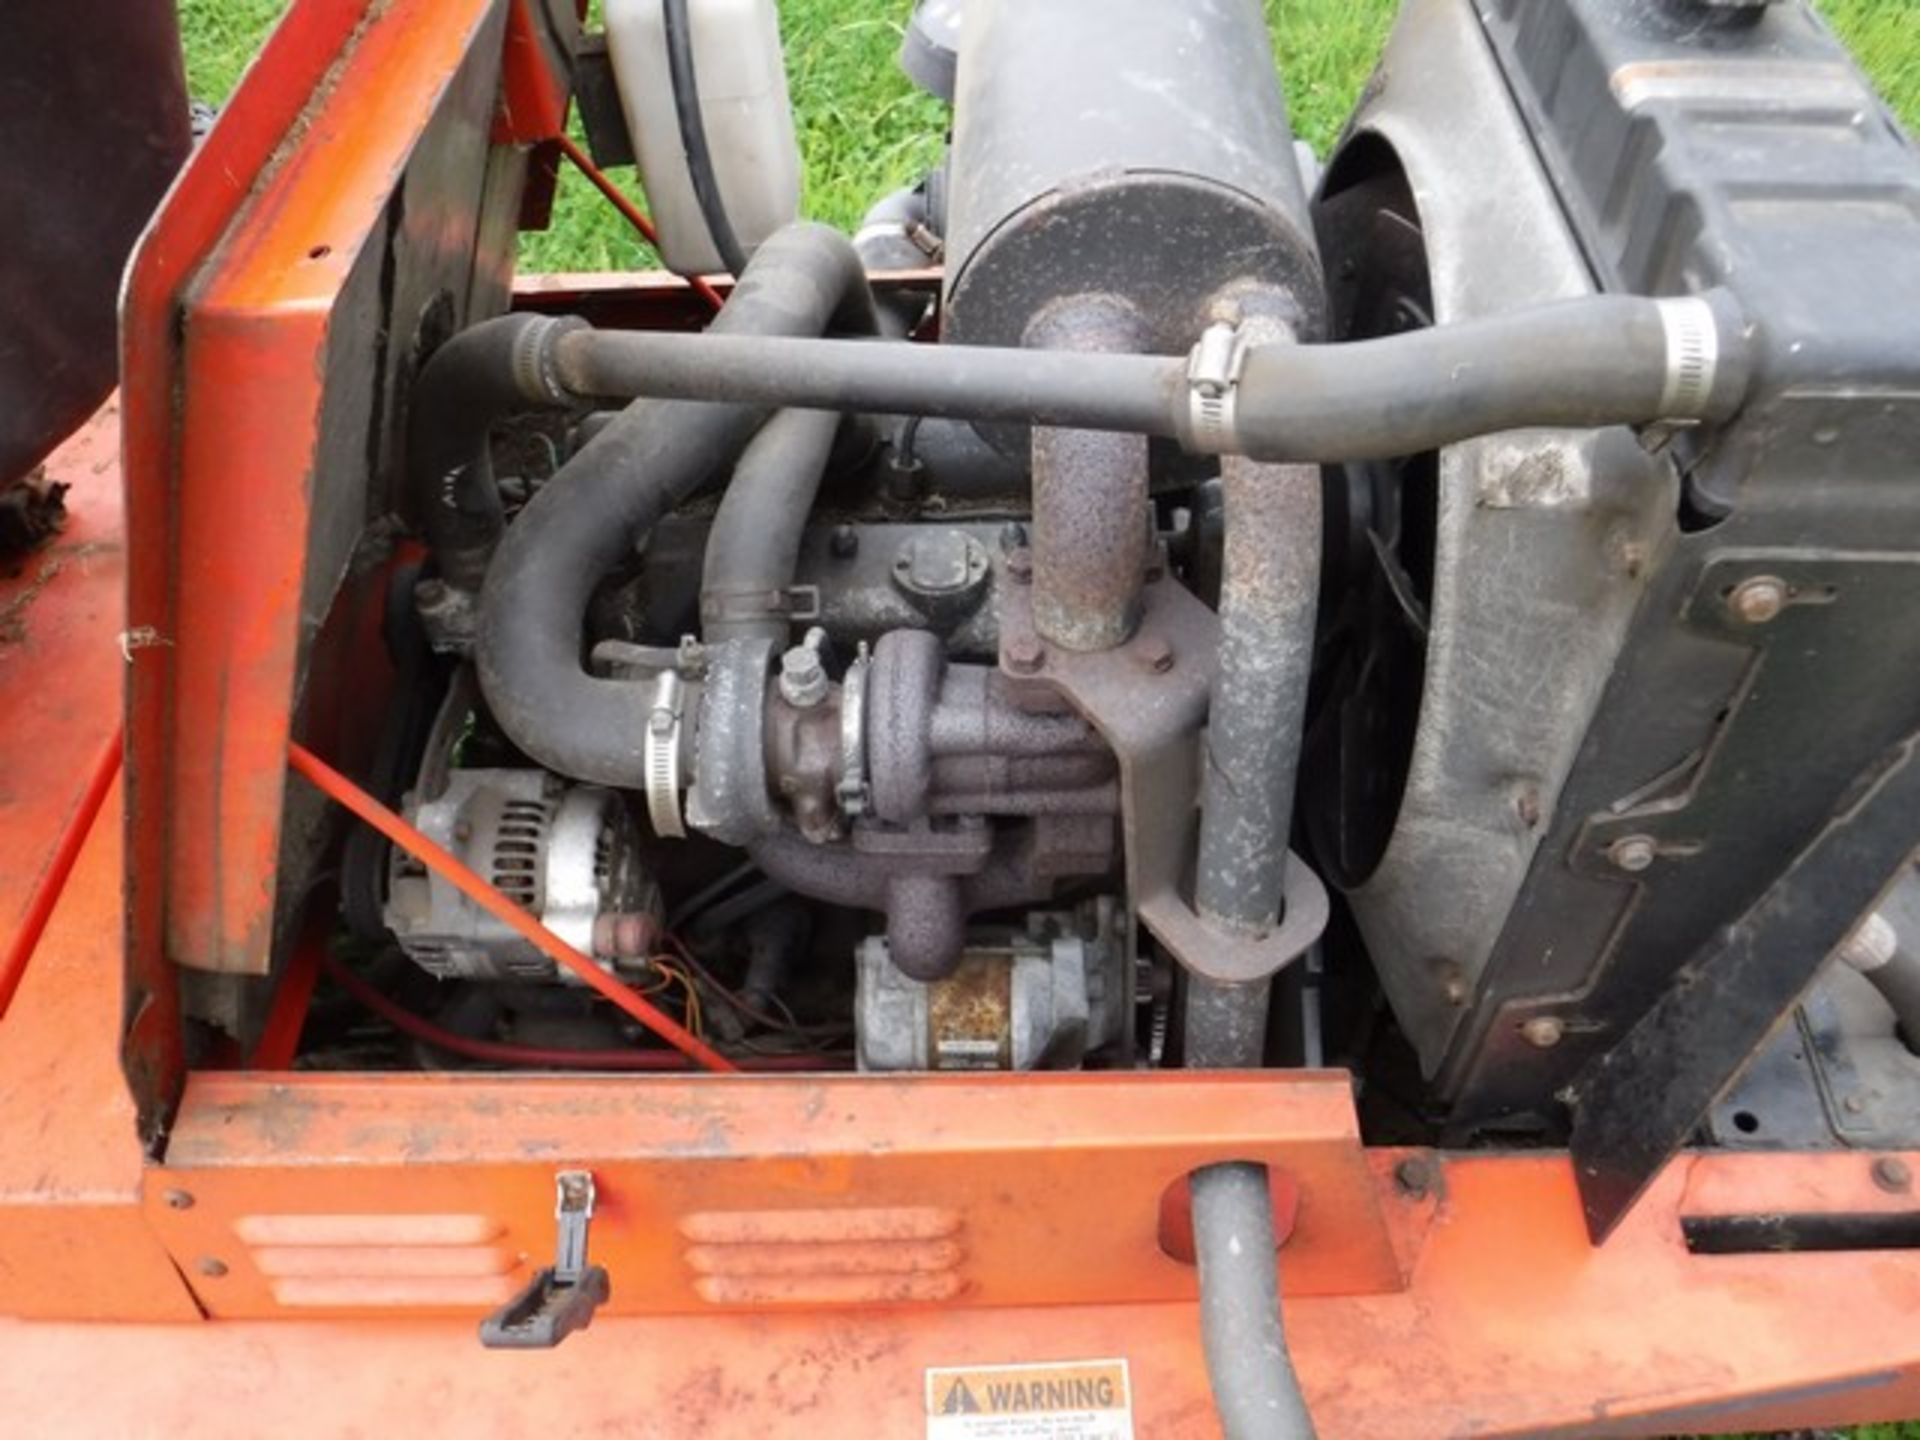 LF135 JACOBSEN FAIRWAY RIDE ON MOWER, 1647HRS (NOT VERIFIED) - Image 6 of 9